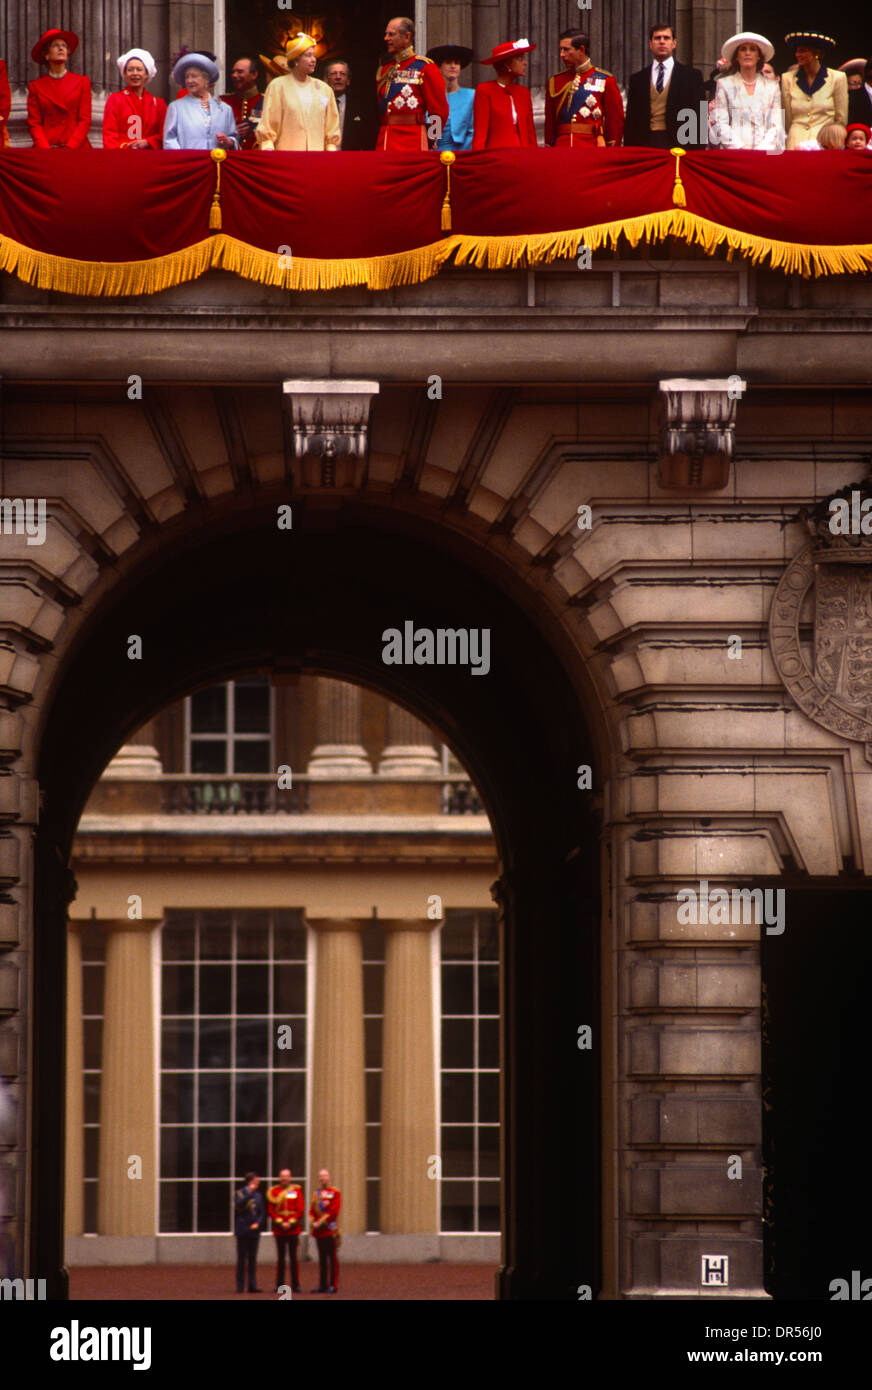 While officers stand in the quadrangle, Britain's royal family appear on the balcony at Buckingham Palace. Stock Photo